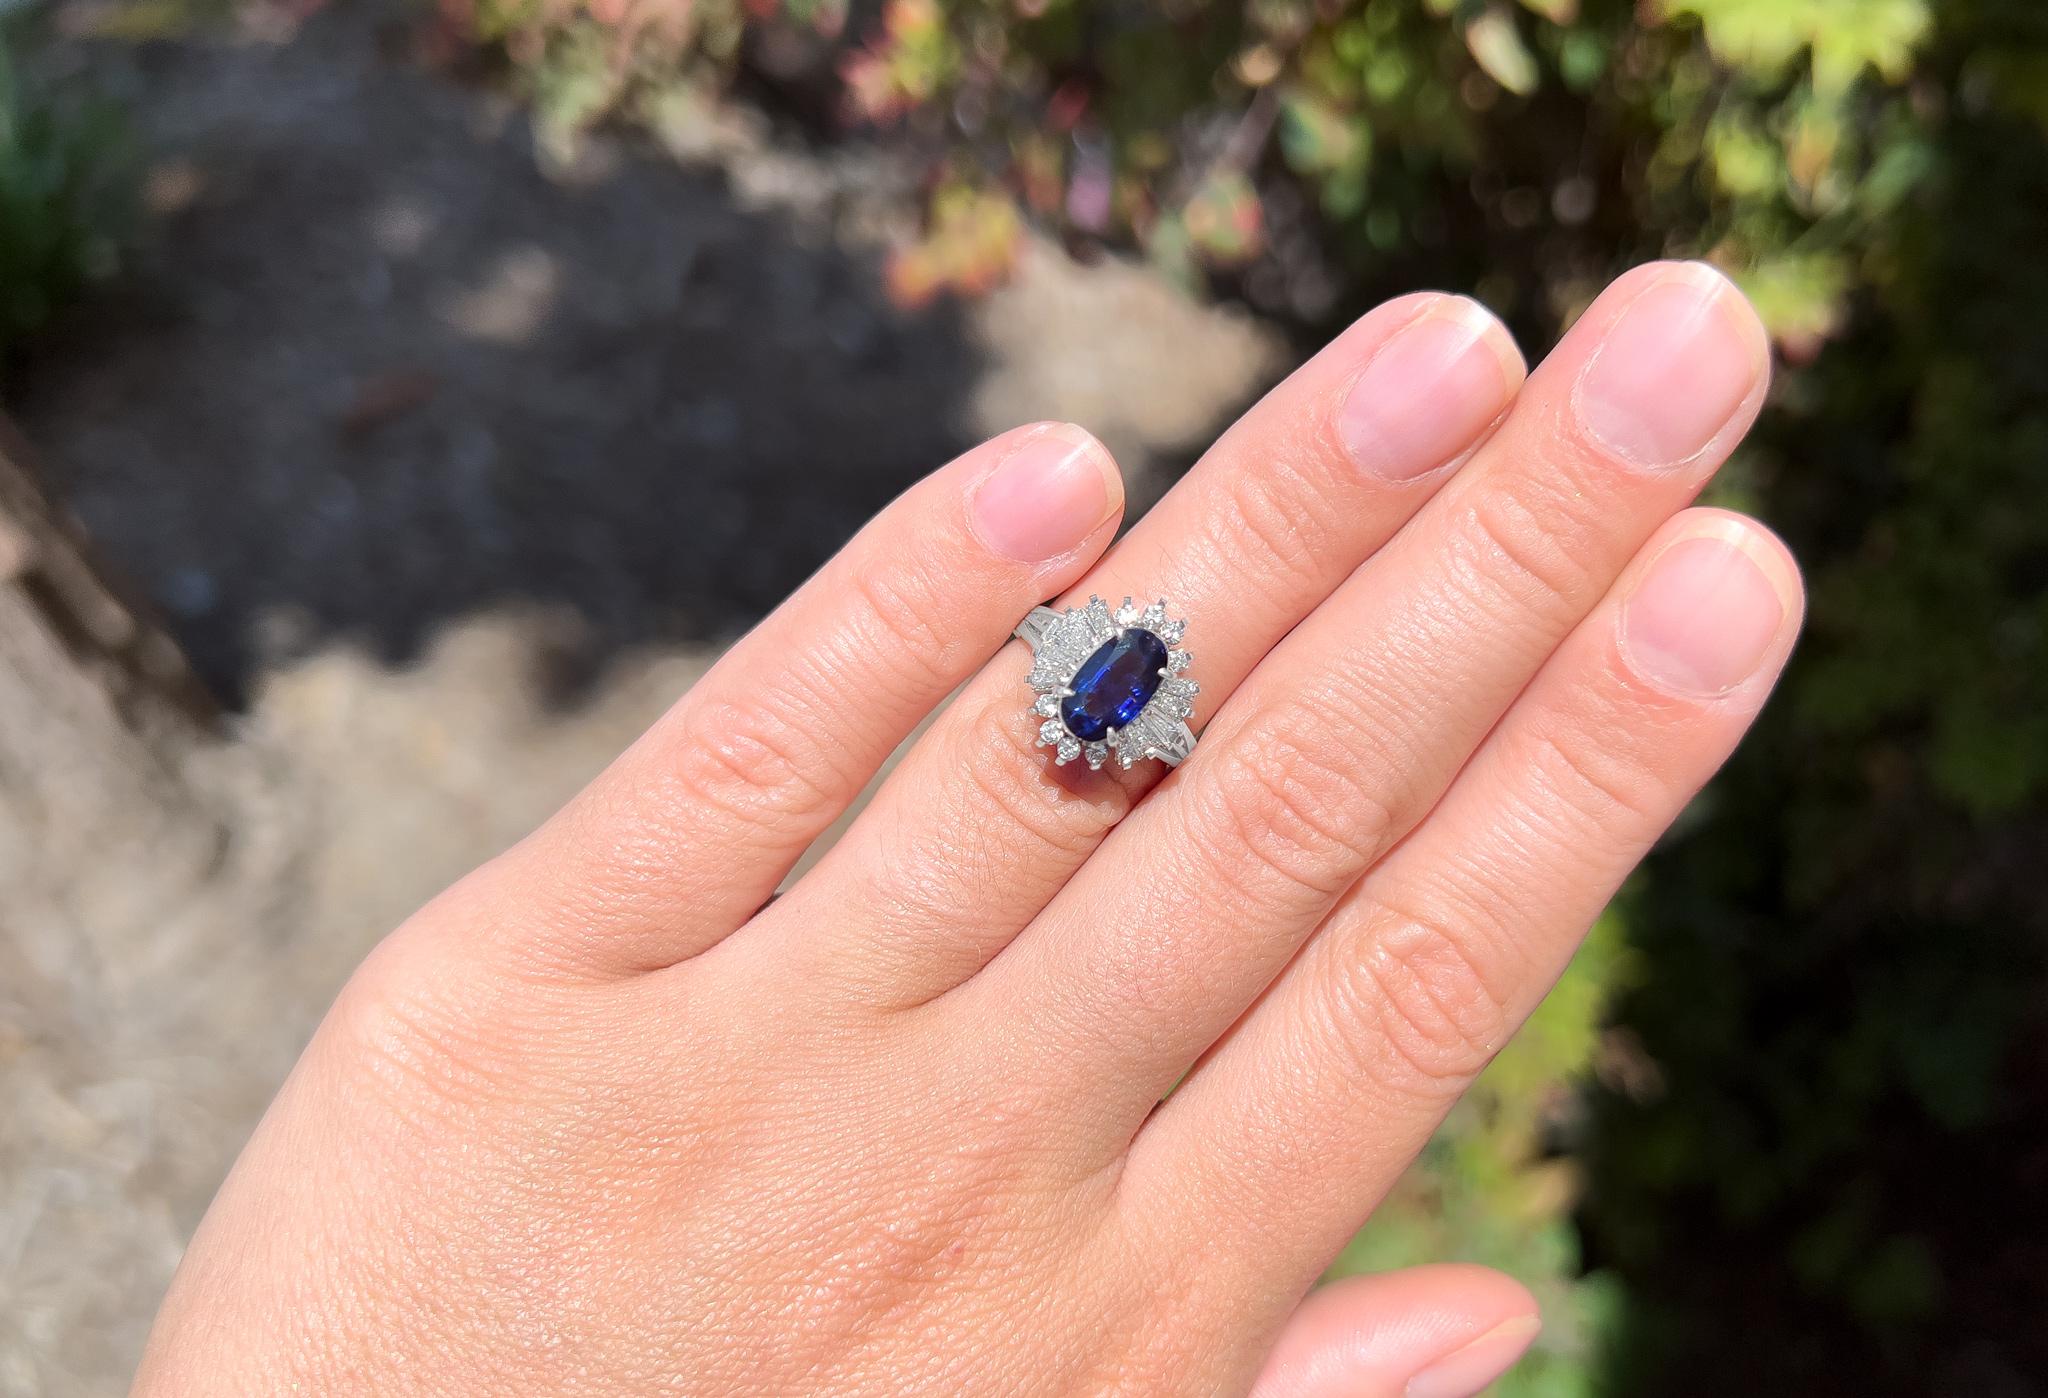 Very Fine Sapphire = 1.85 Carat
Cut: Oval
Diamonds = 0.71 Carats
( Color: F, Clarity: VS )
Metal: Platinum
Ring Size: 4.5* US
*It can be resized complimentary